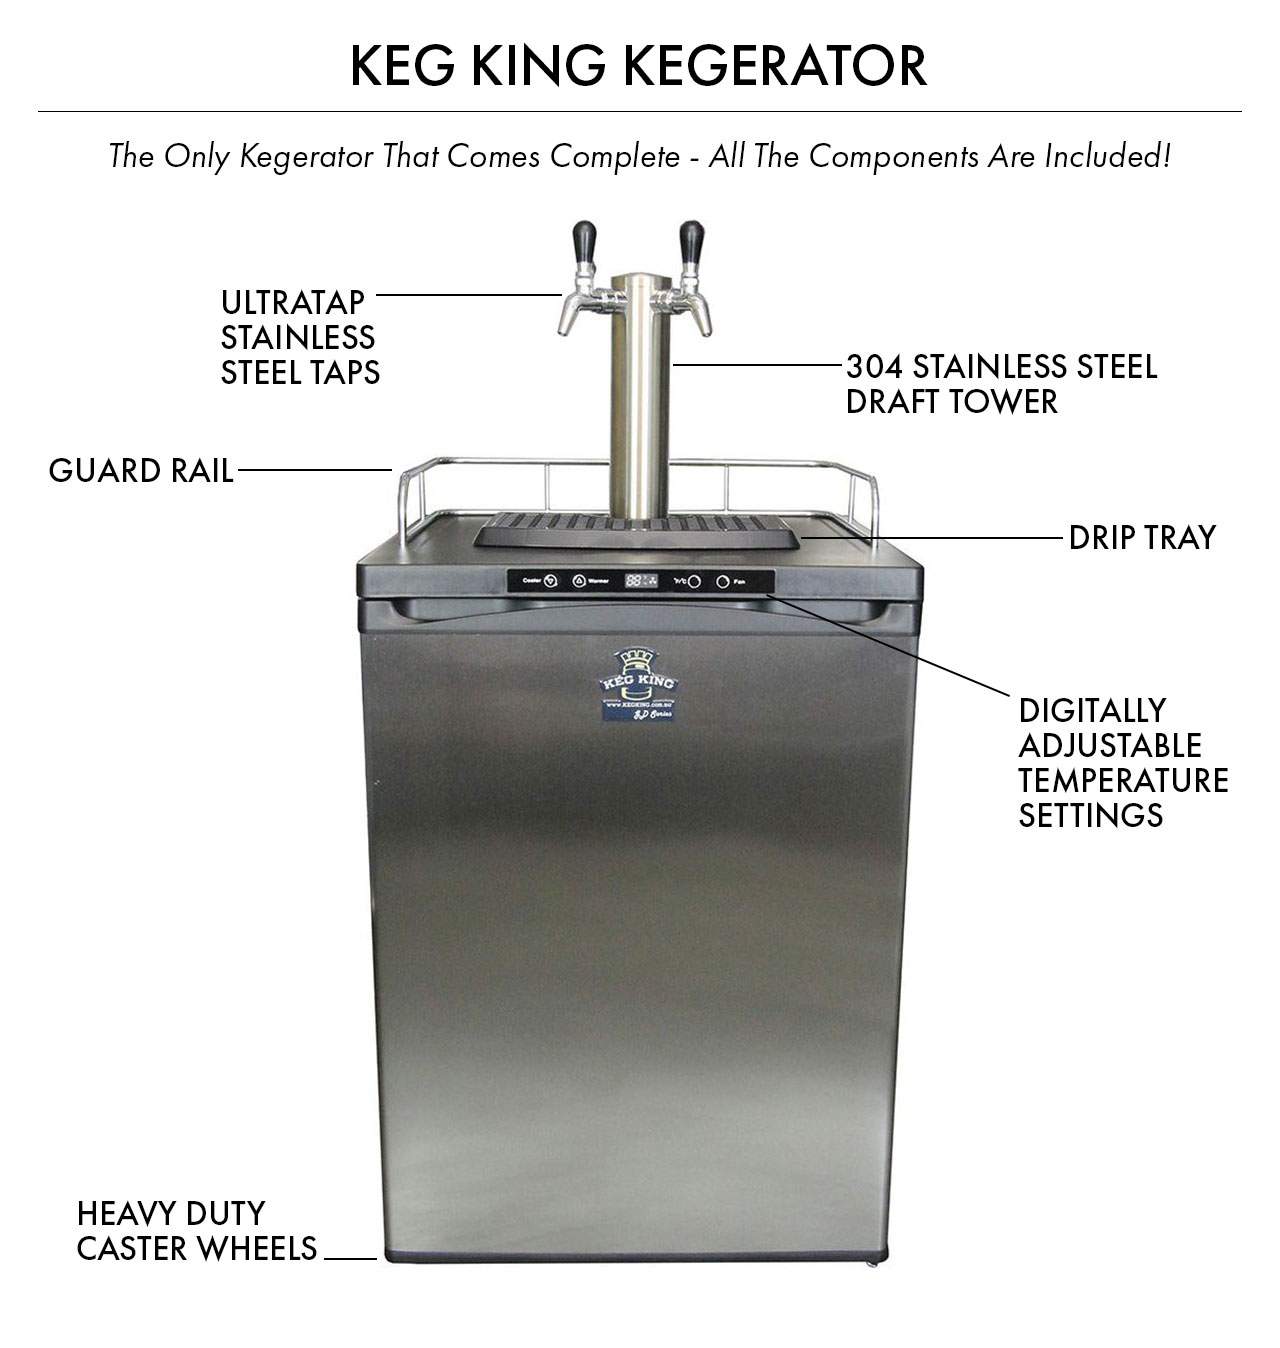 The only Kegerator that comes complete. Everything included!